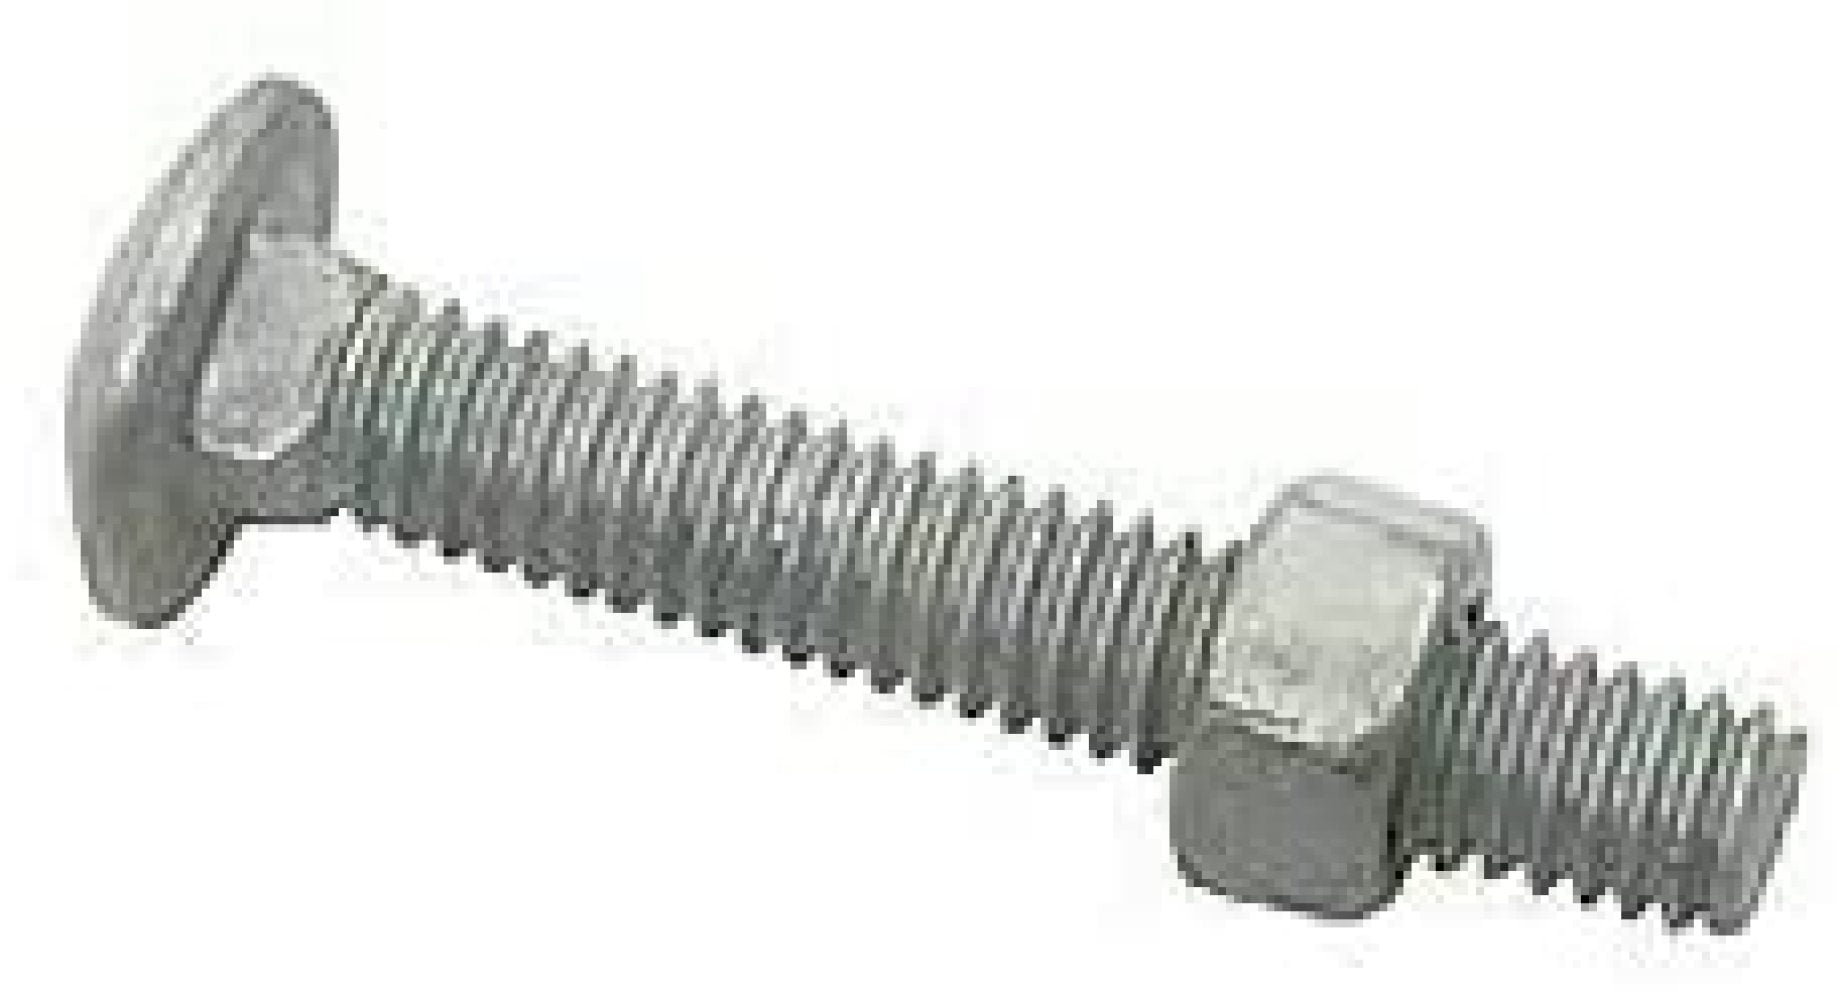 3/8-16 x 8" Carriage Bolts and Nuts Hot Dip Galvanized Quantity 500 